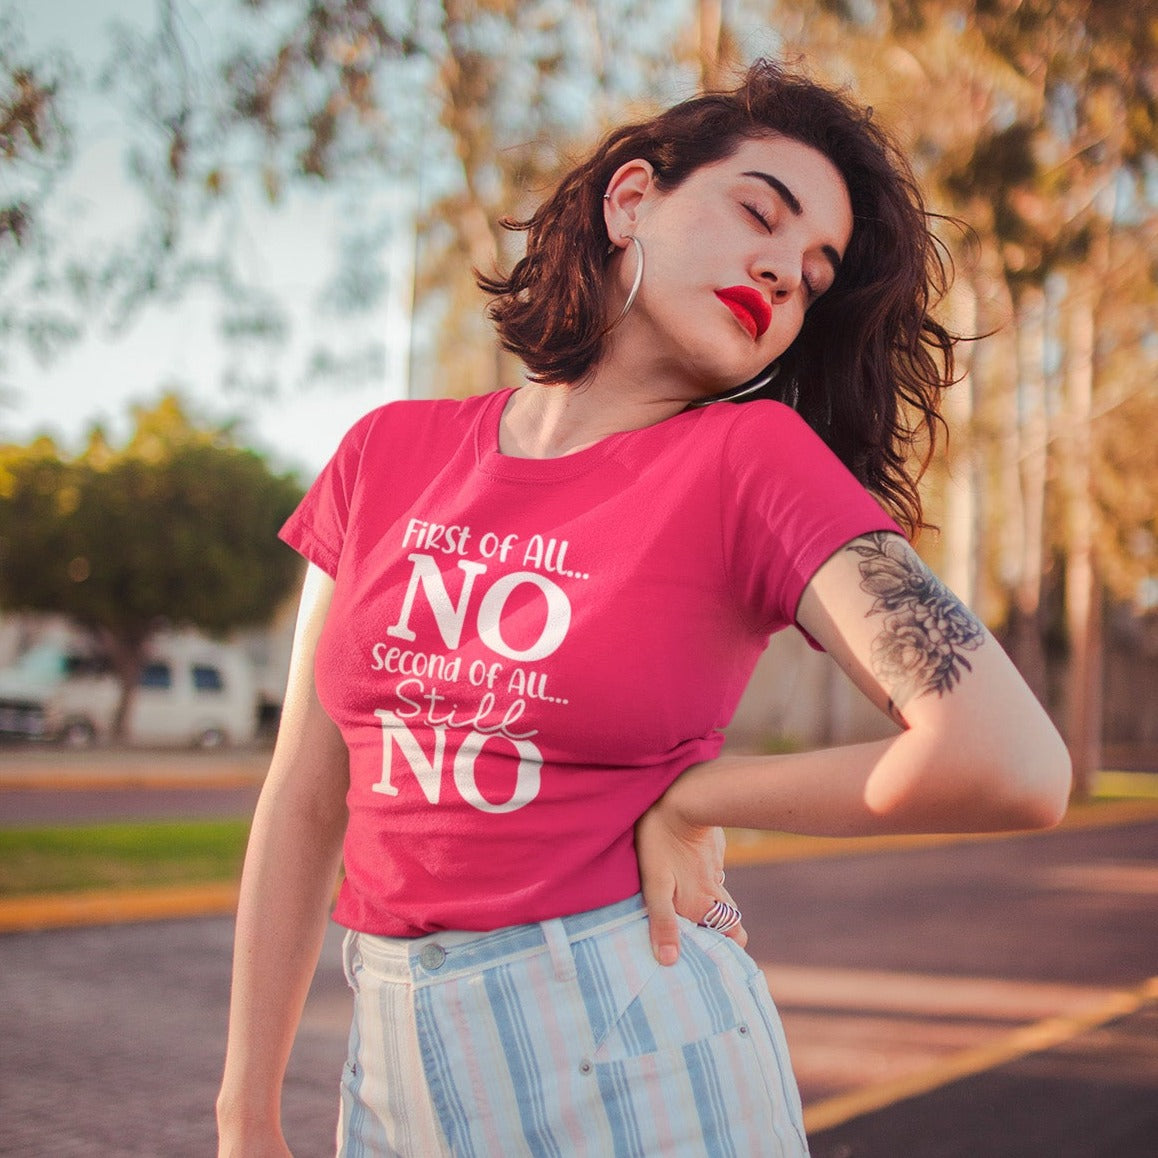 first-of-all-no-second-of-all-no-berry-t-shirt-sarcastic-women-mockup-featuring-a-fashion-forward-woman-in-the-a-street